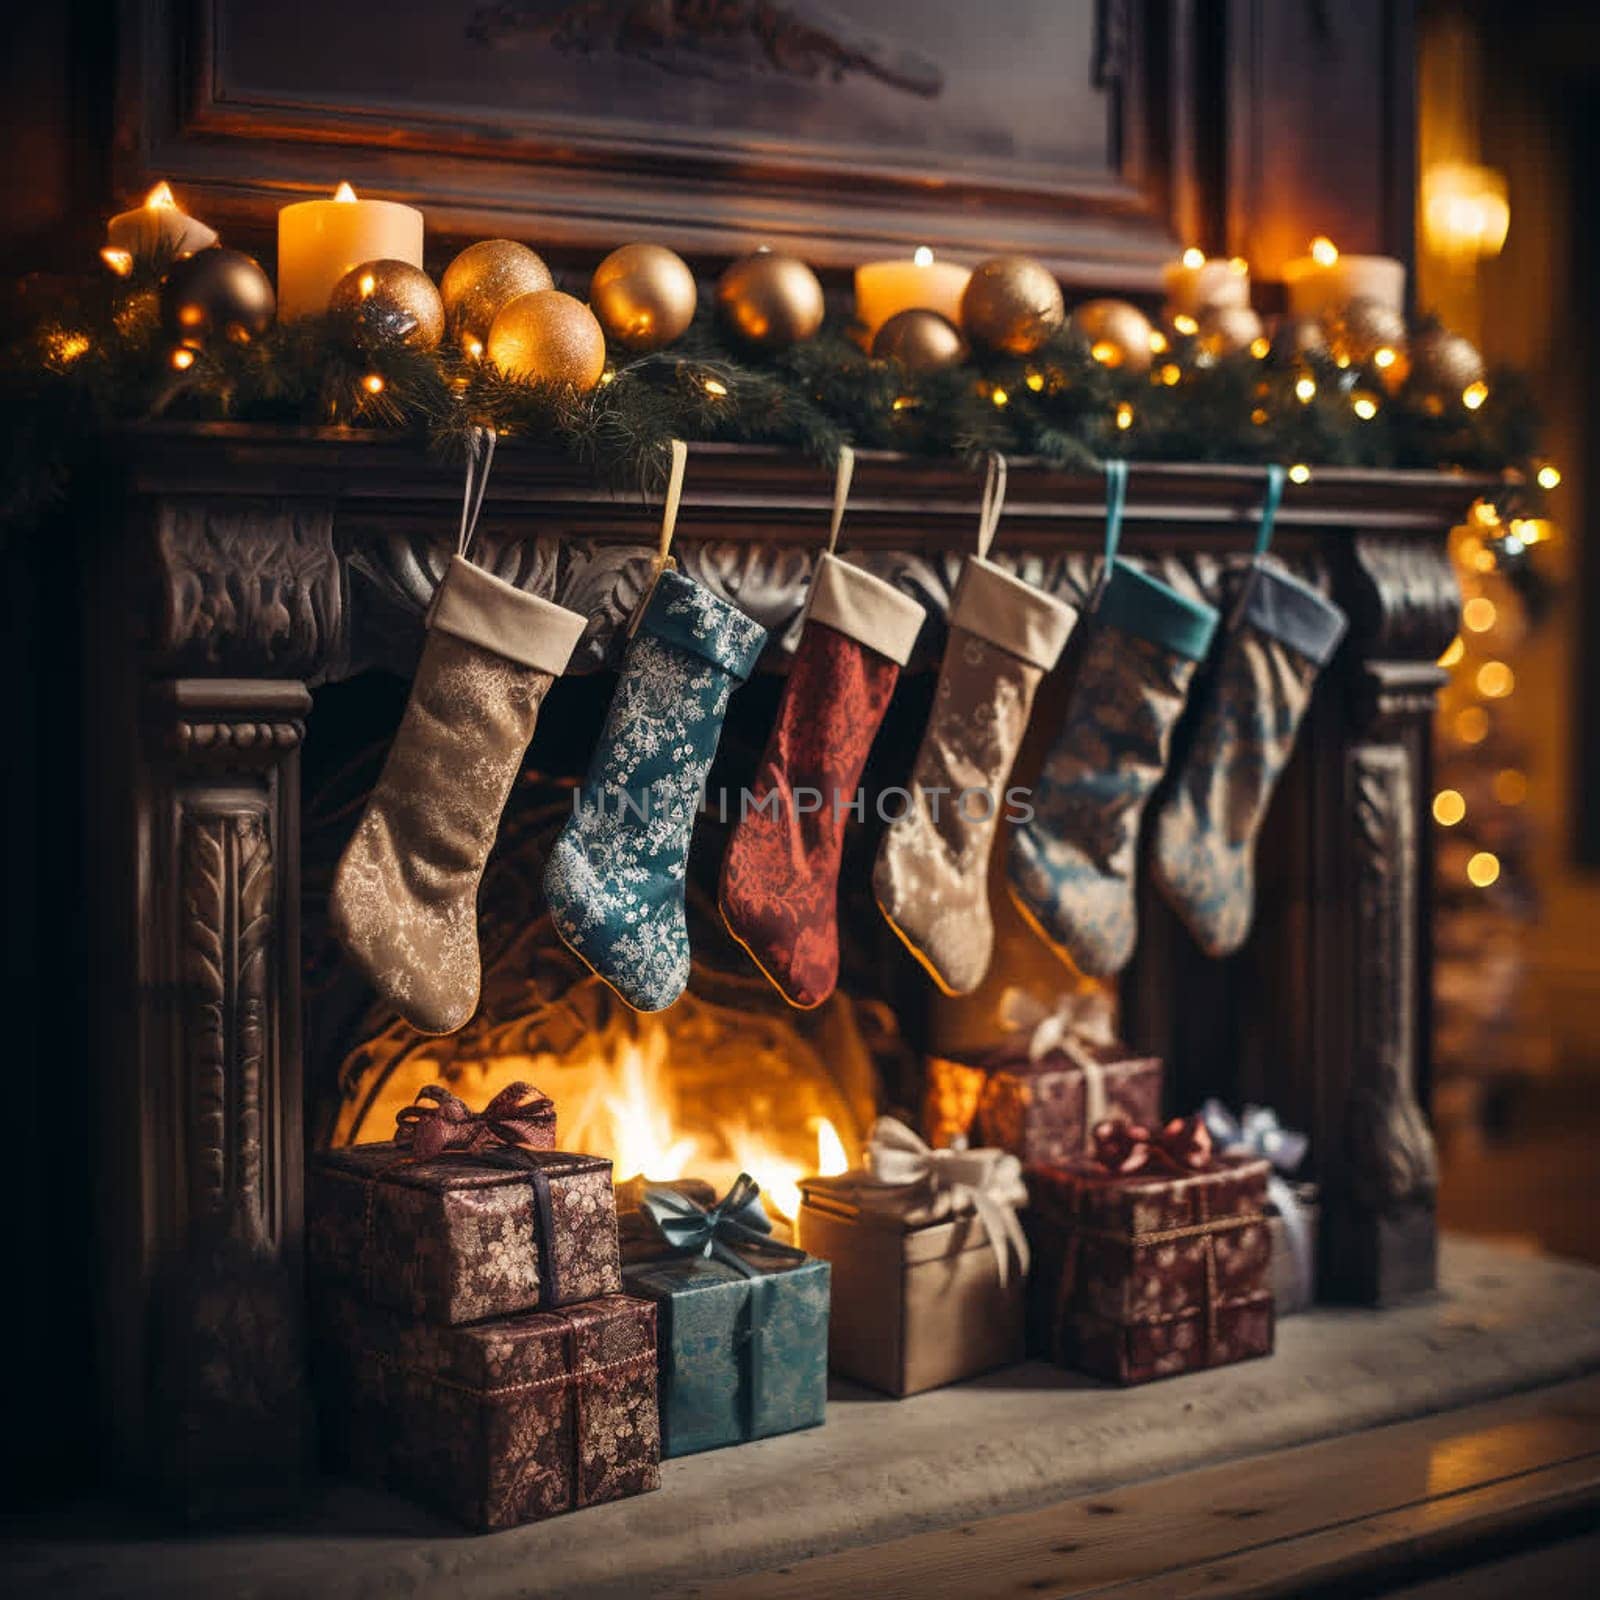 Christmas Socks With Gifts Near Fireplace In Festive Decorated Living Room by ekaterinabyuksel